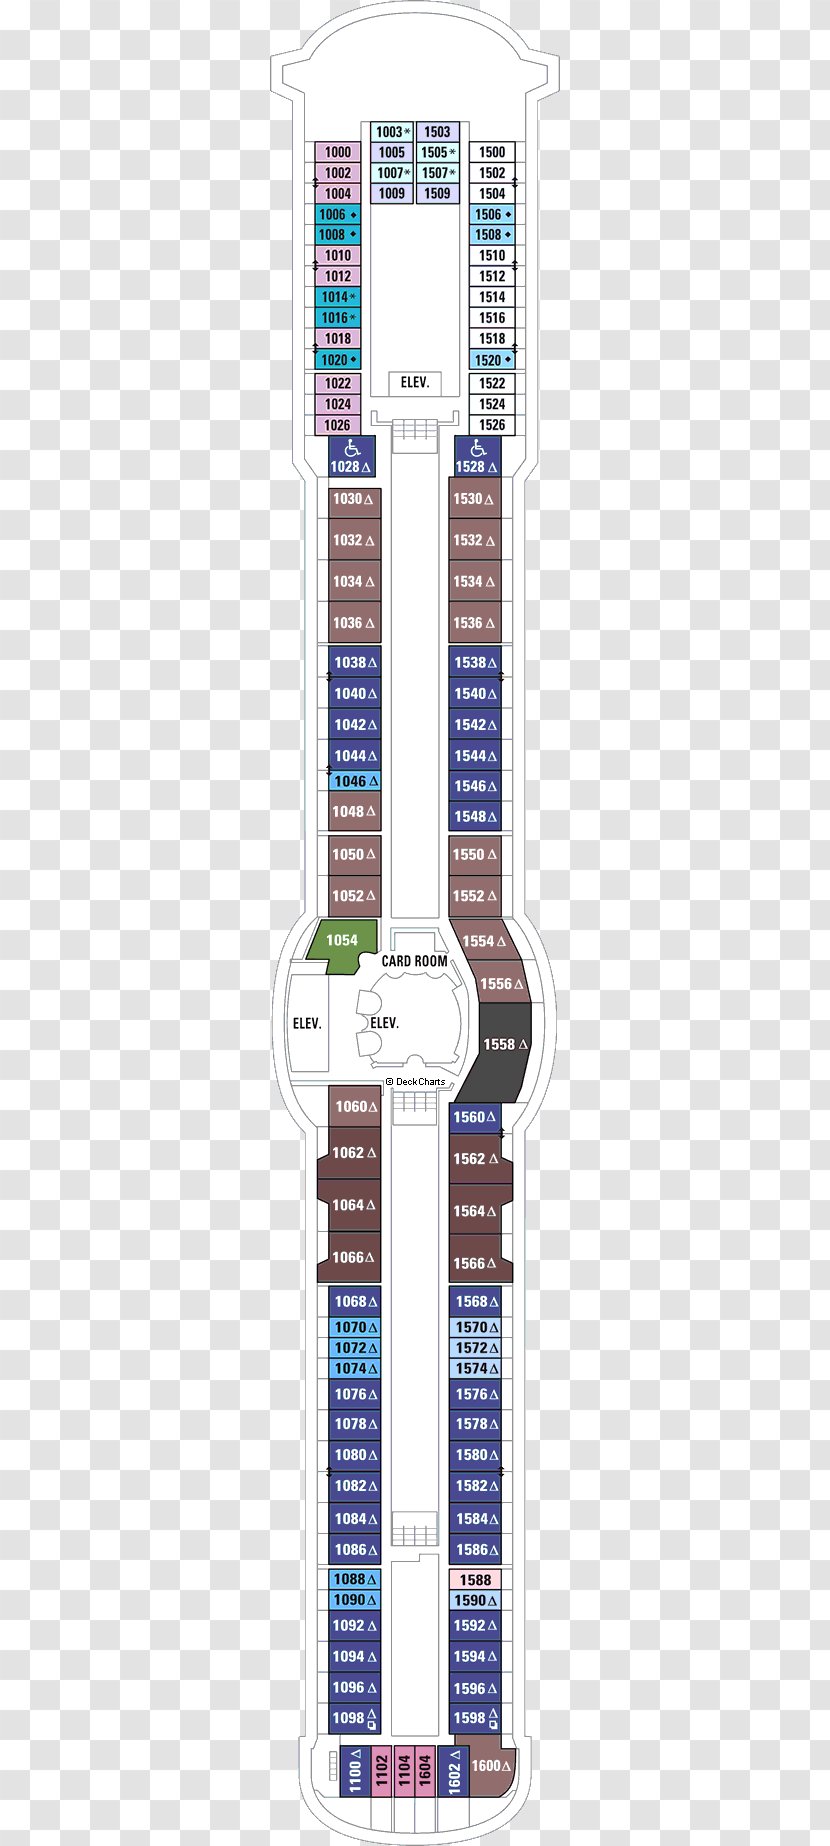 State Room MS Radiance Of The Seas Brilliance Jewel Deck - Cruise Ship - Balcony River View Transparent PNG